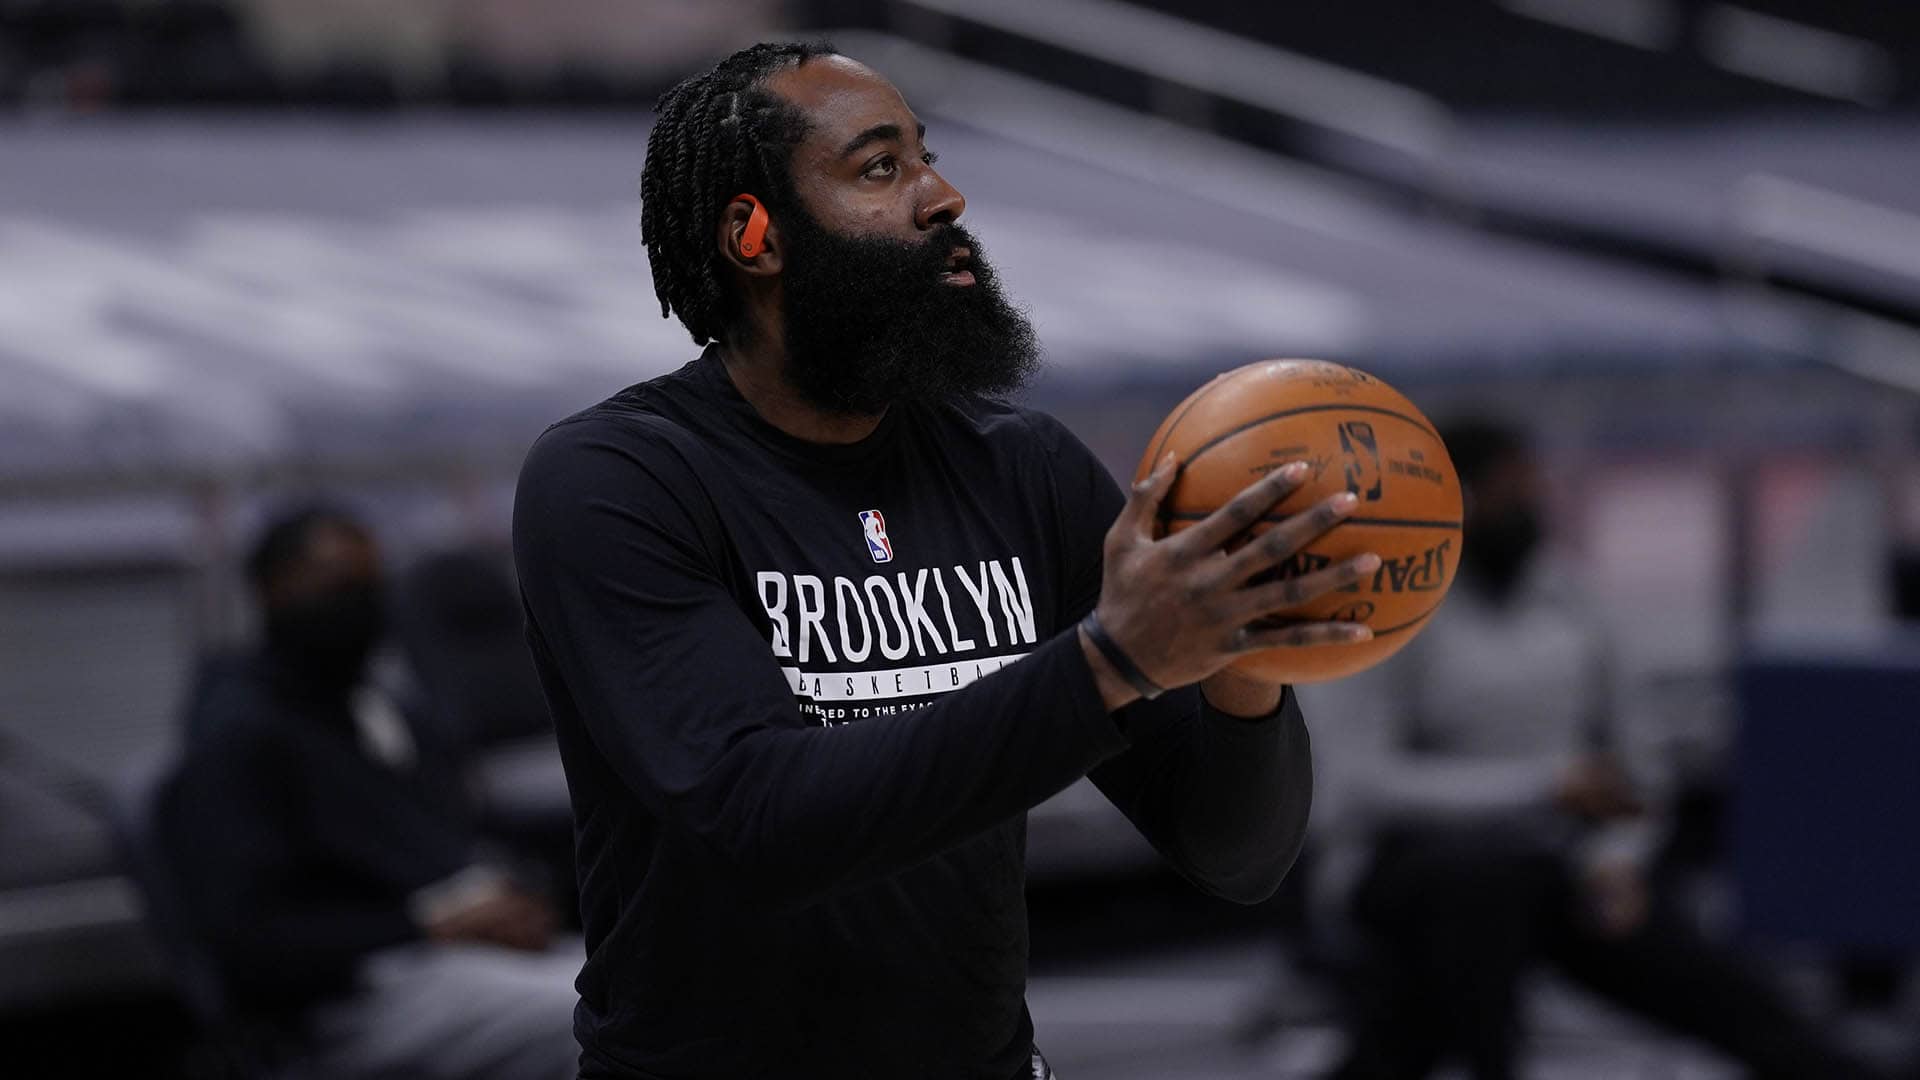 Image of James Harden playing basketball as his sport and work out